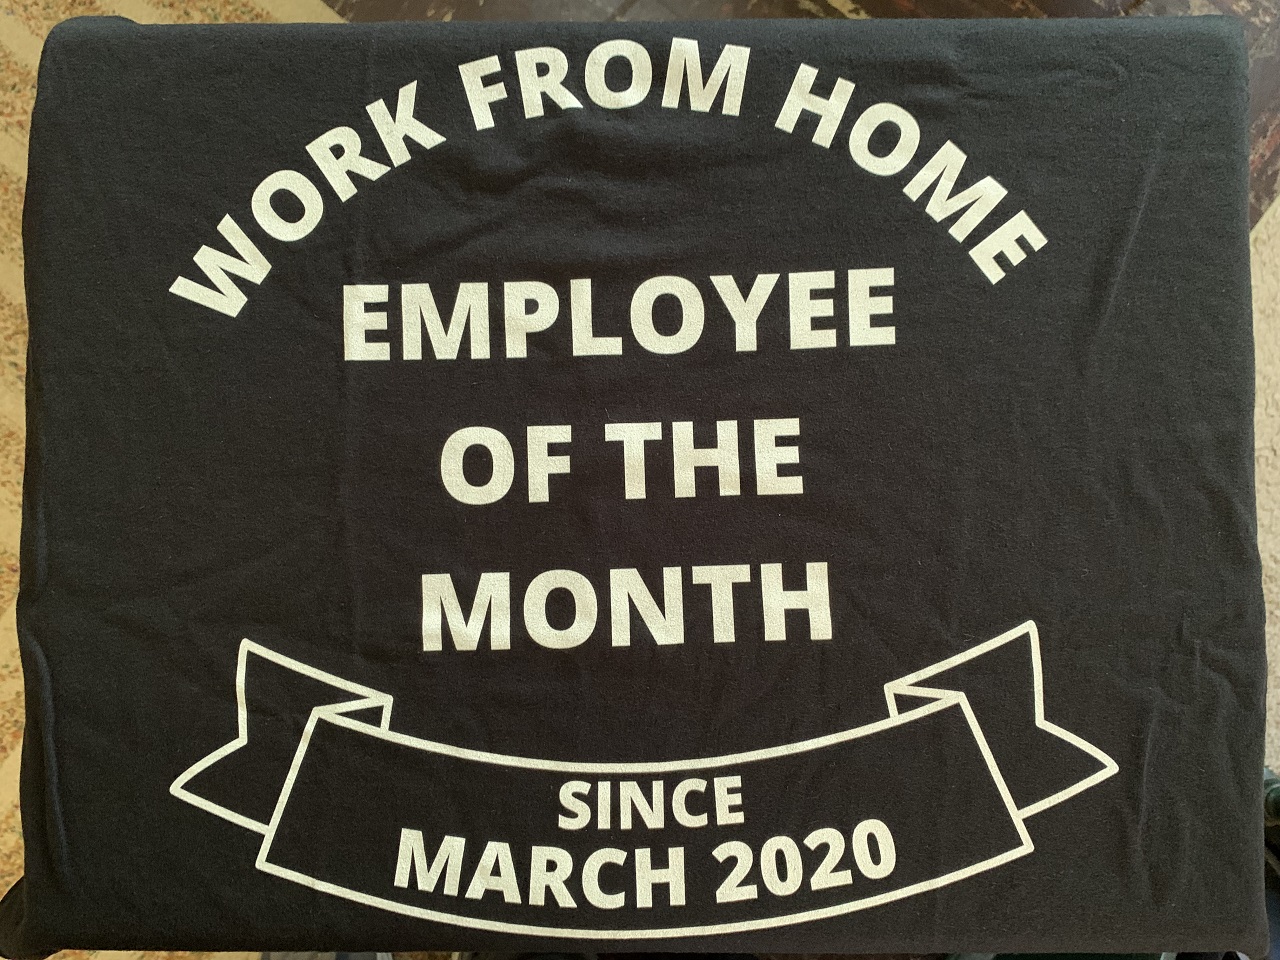 Work from Home Employee of the Month since March 2020